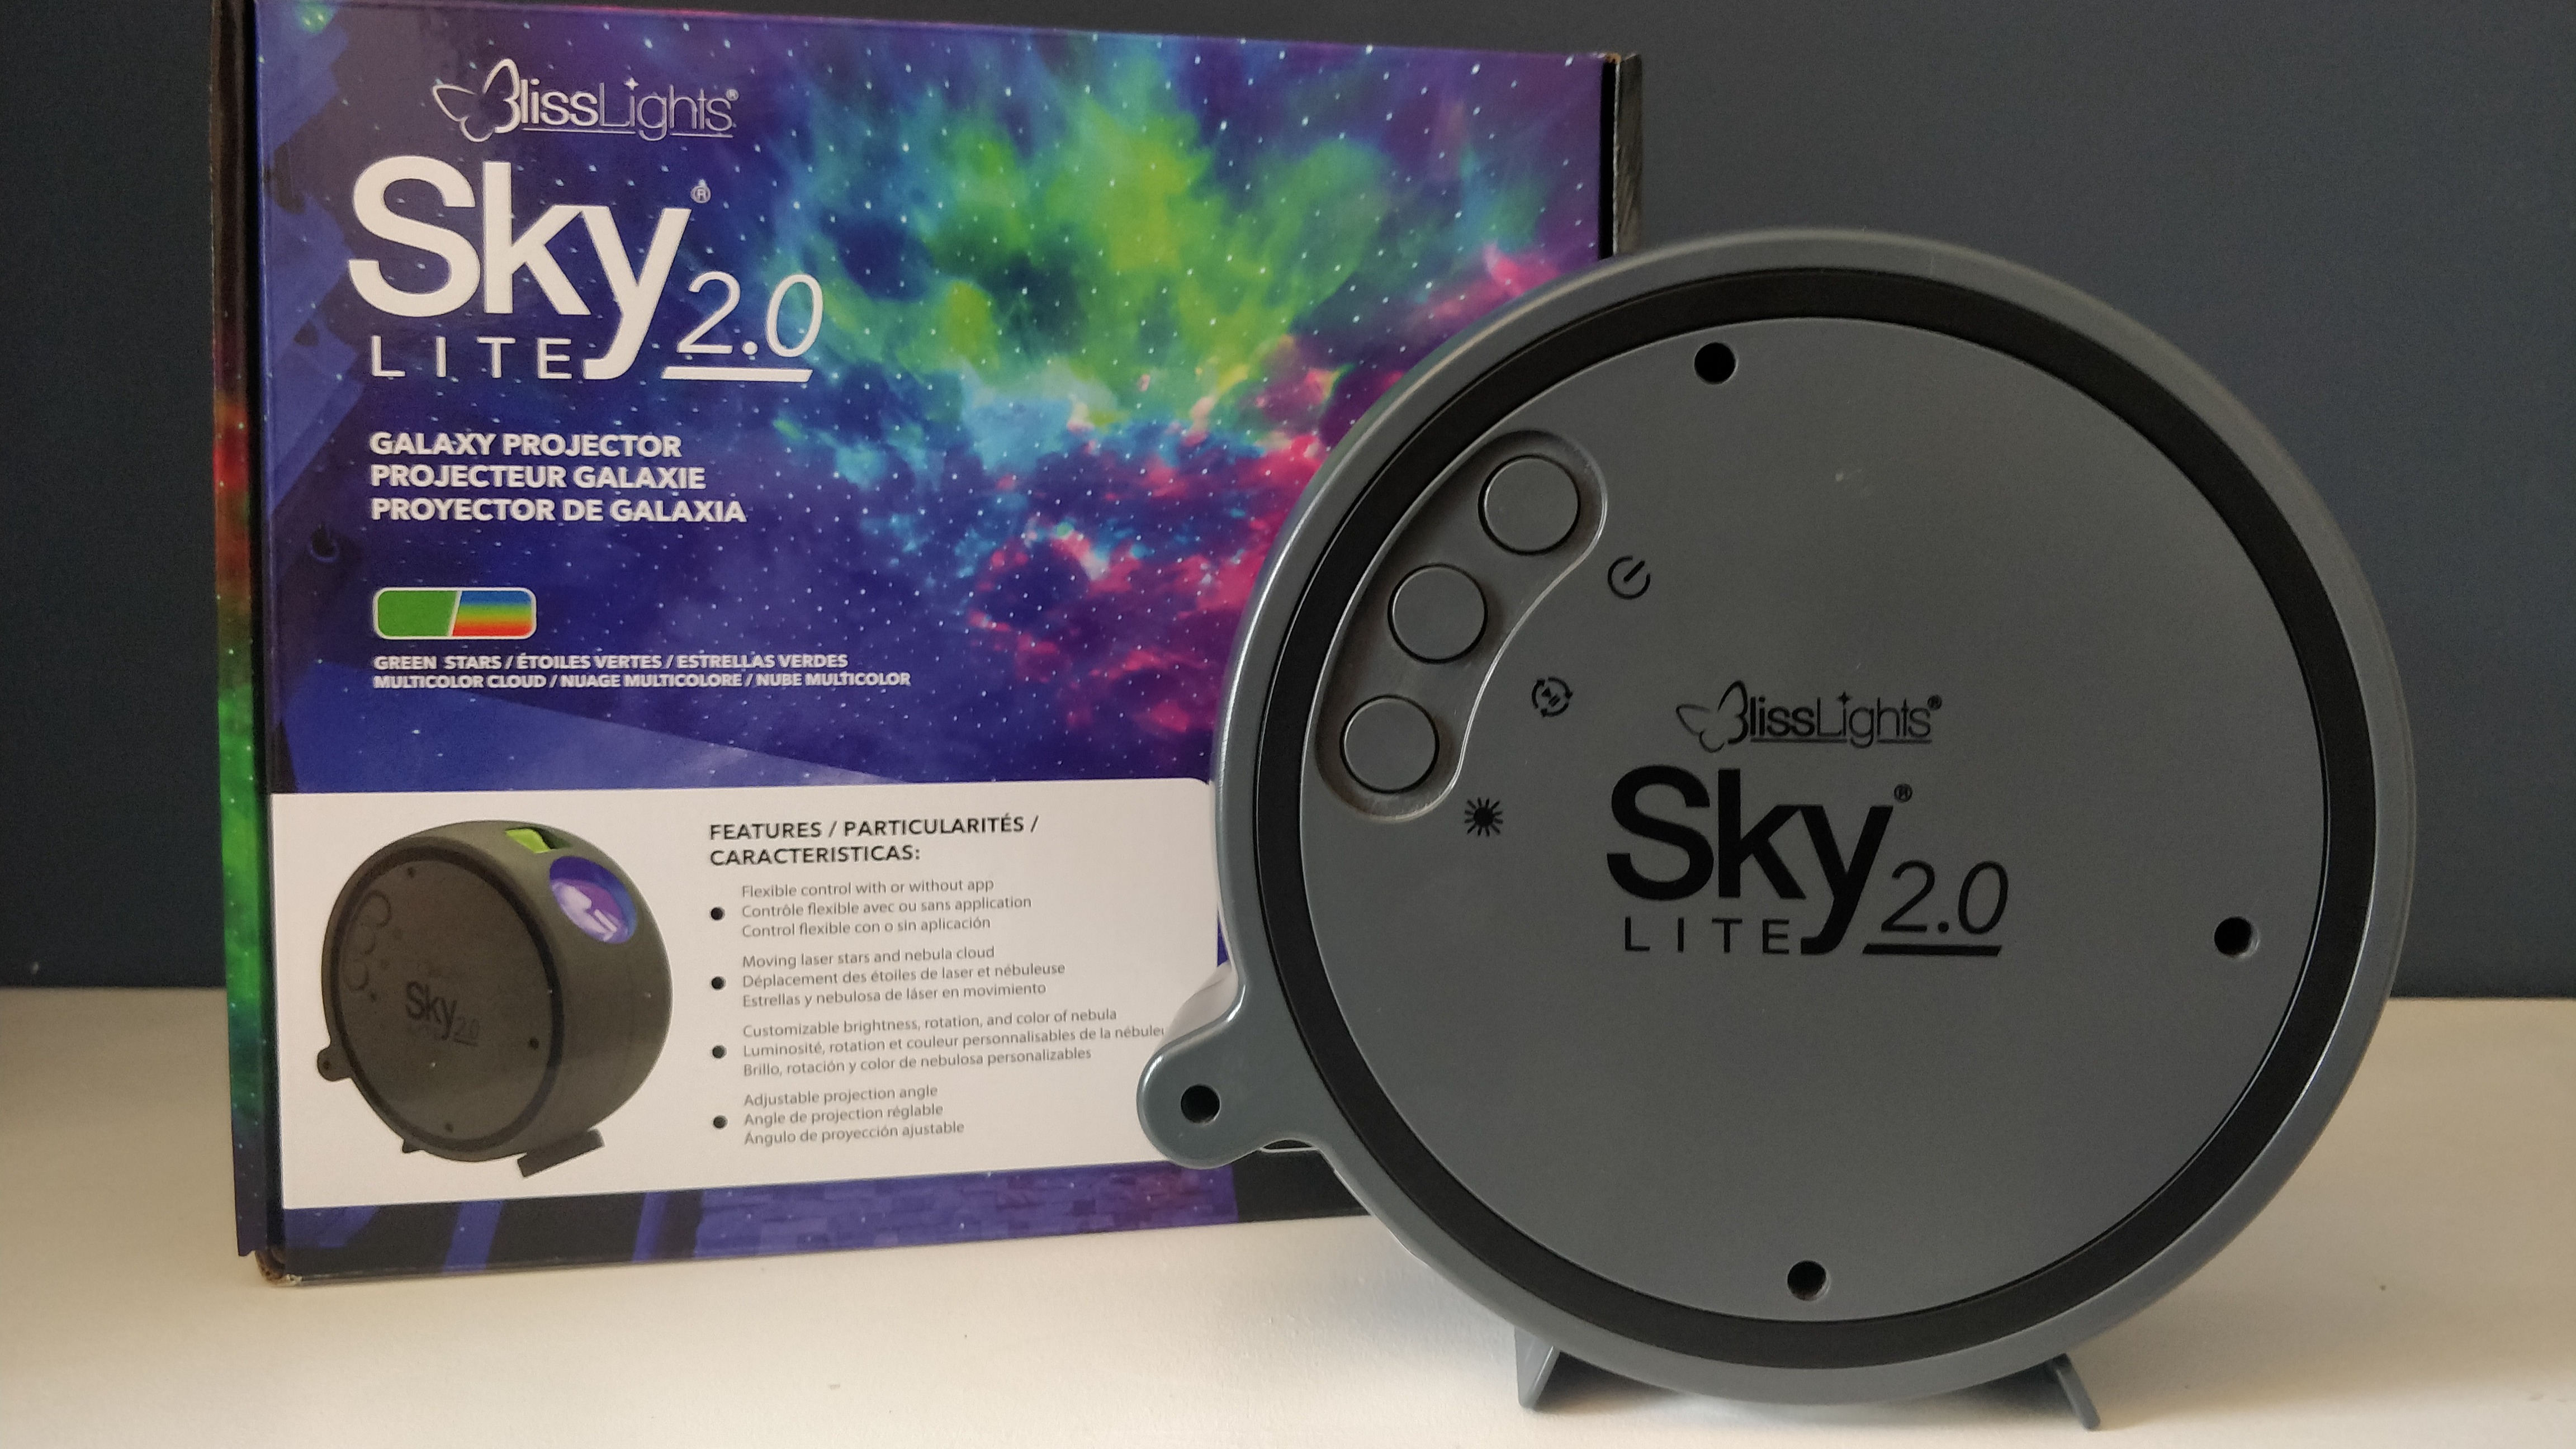 Sky Lite 2.0 product and box